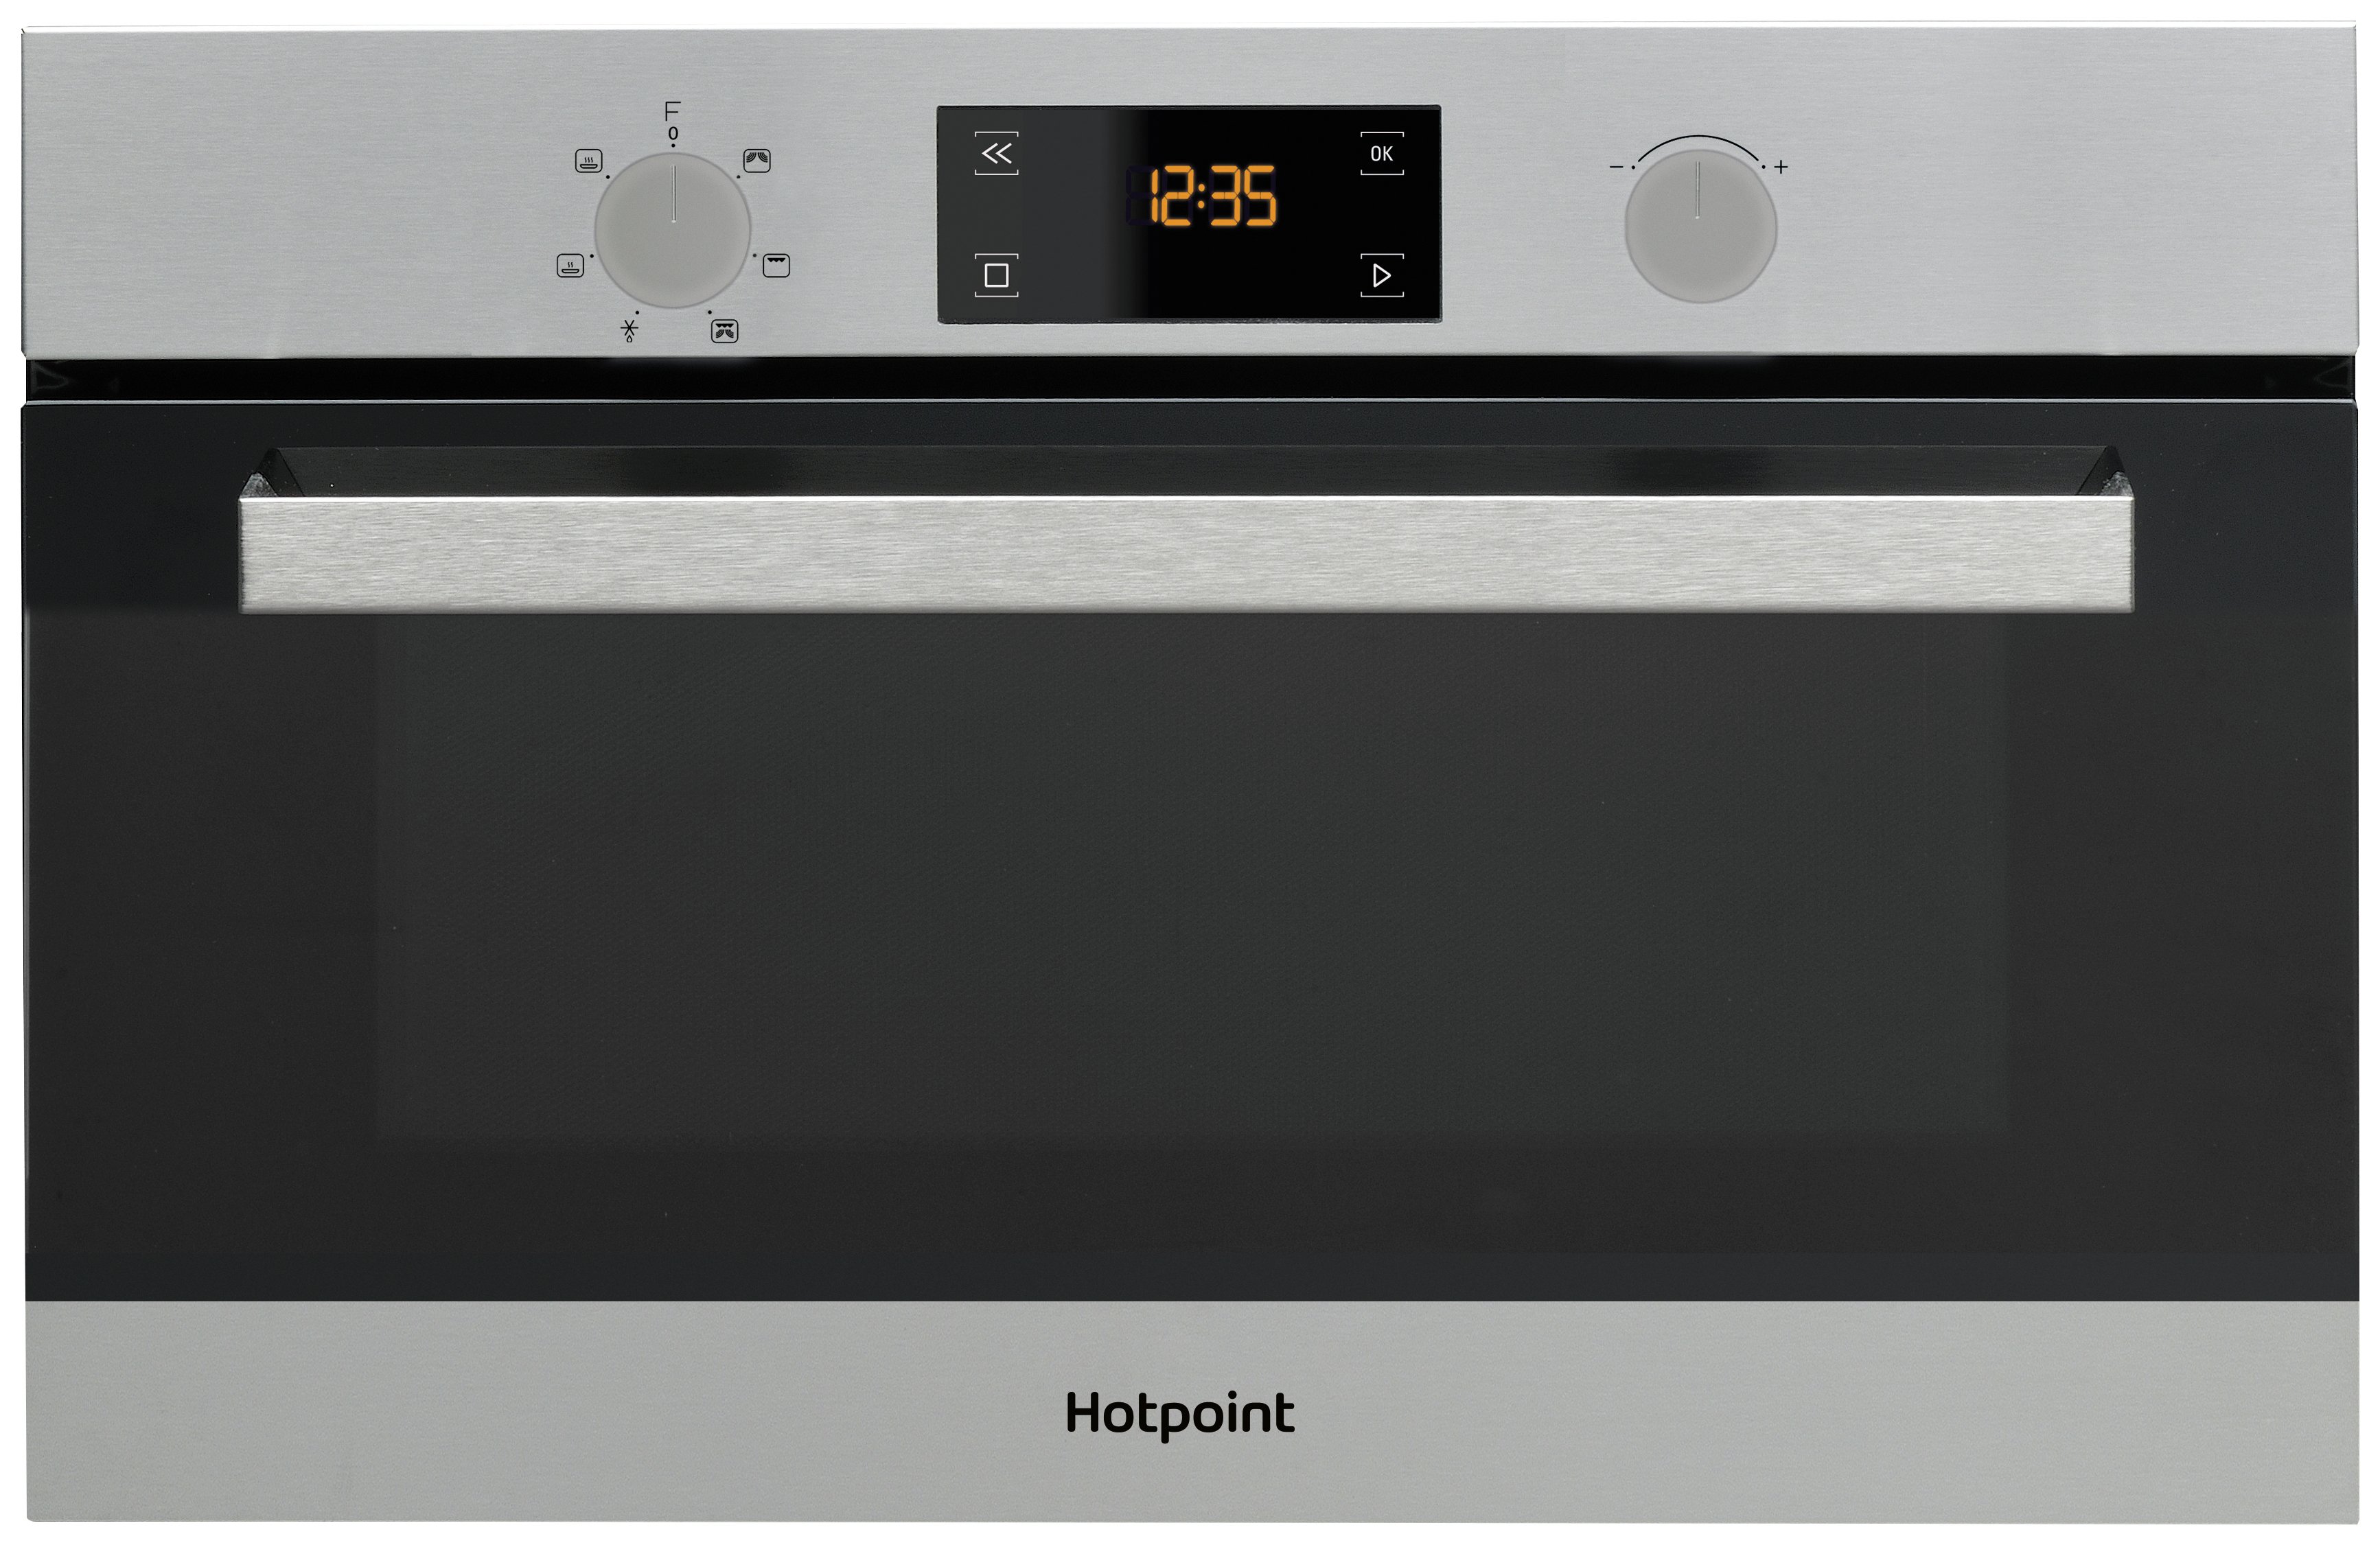 Hotpoint MD344IXH 31L 1000W Microwave - Stainless Steel